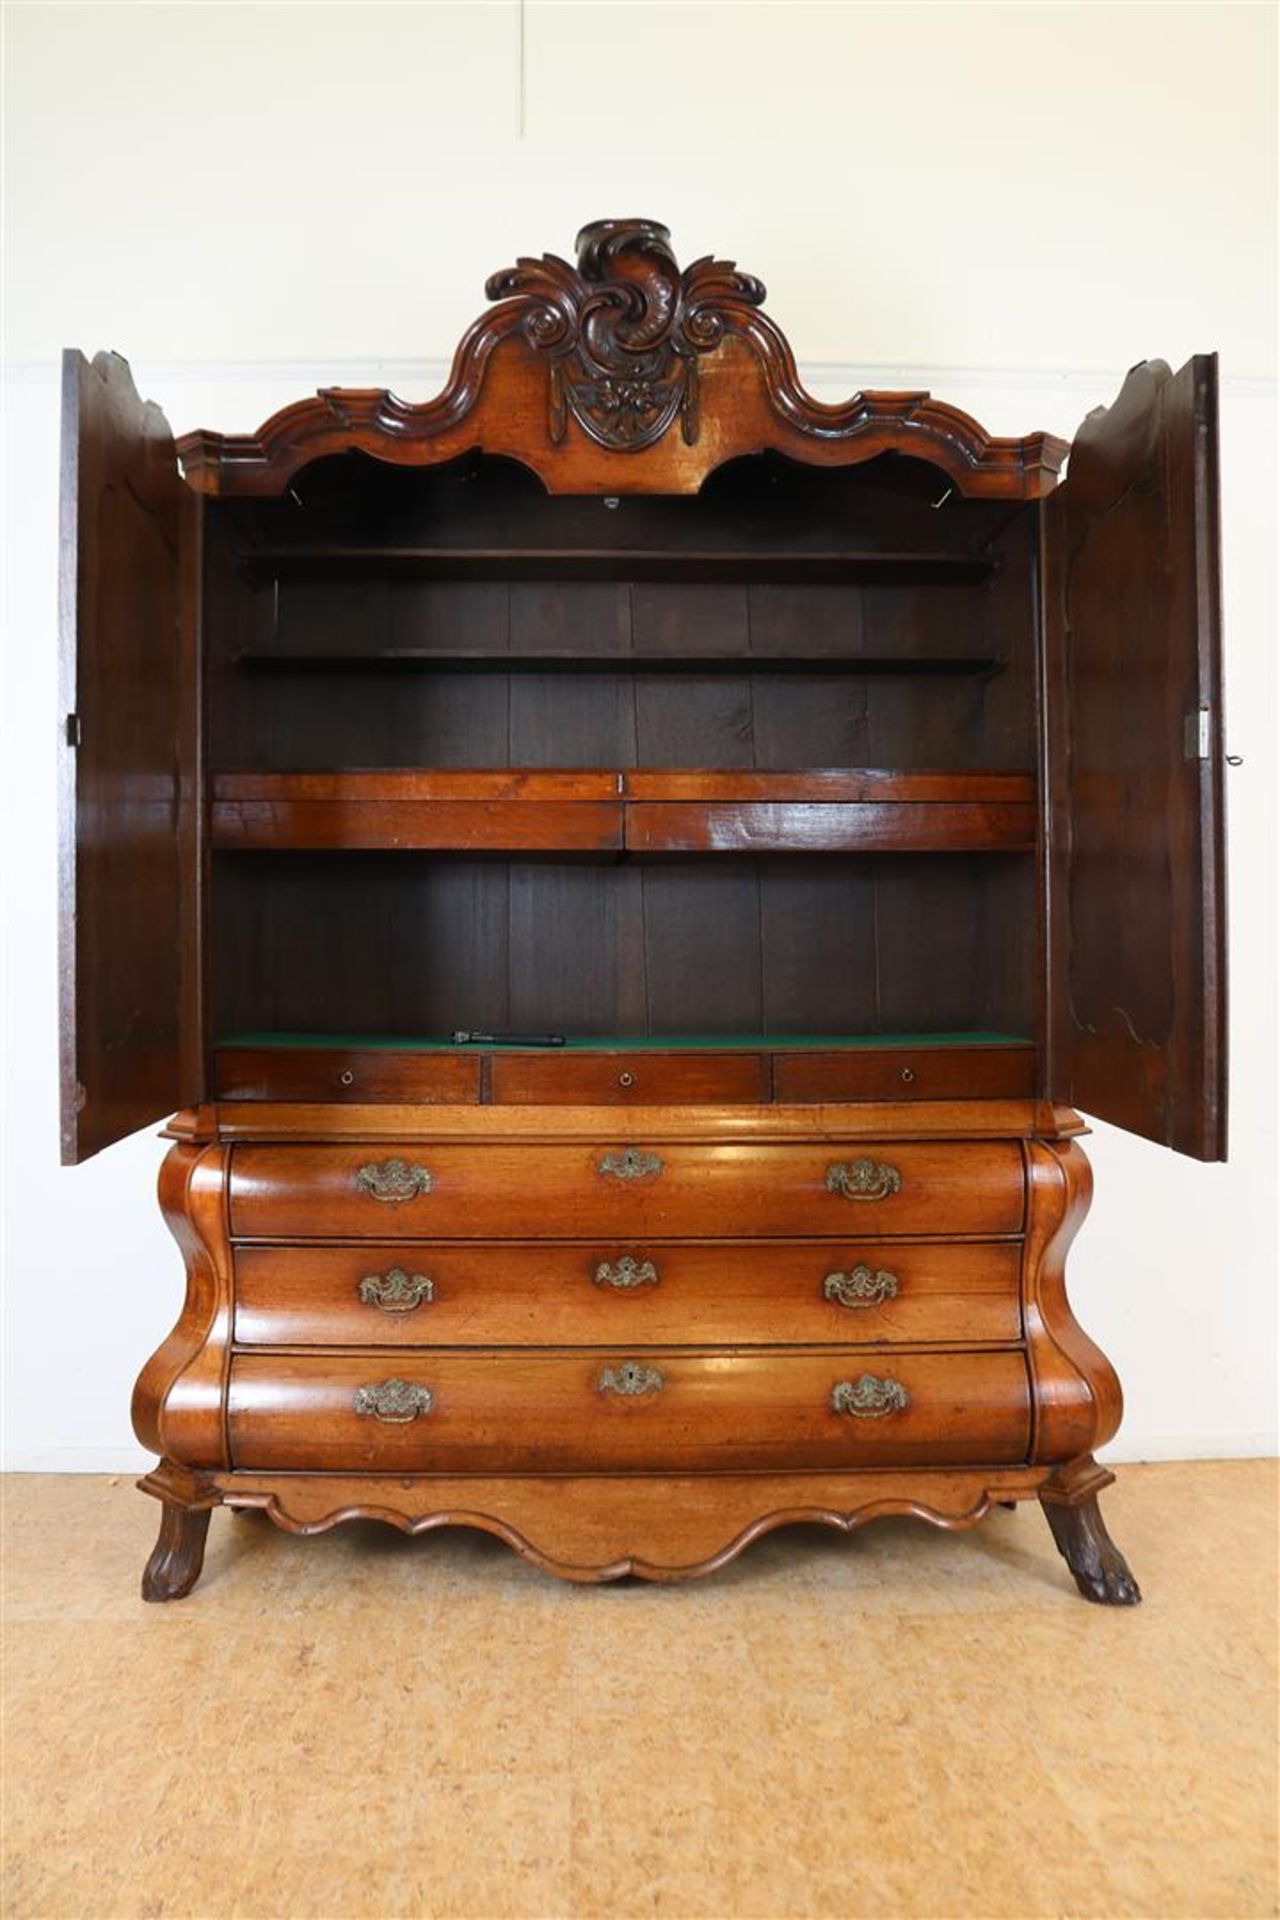 Oak Louis XV cabinet with carved ornament in double curved hood, 2 panel doors on 3 curved drawers - Image 2 of 6